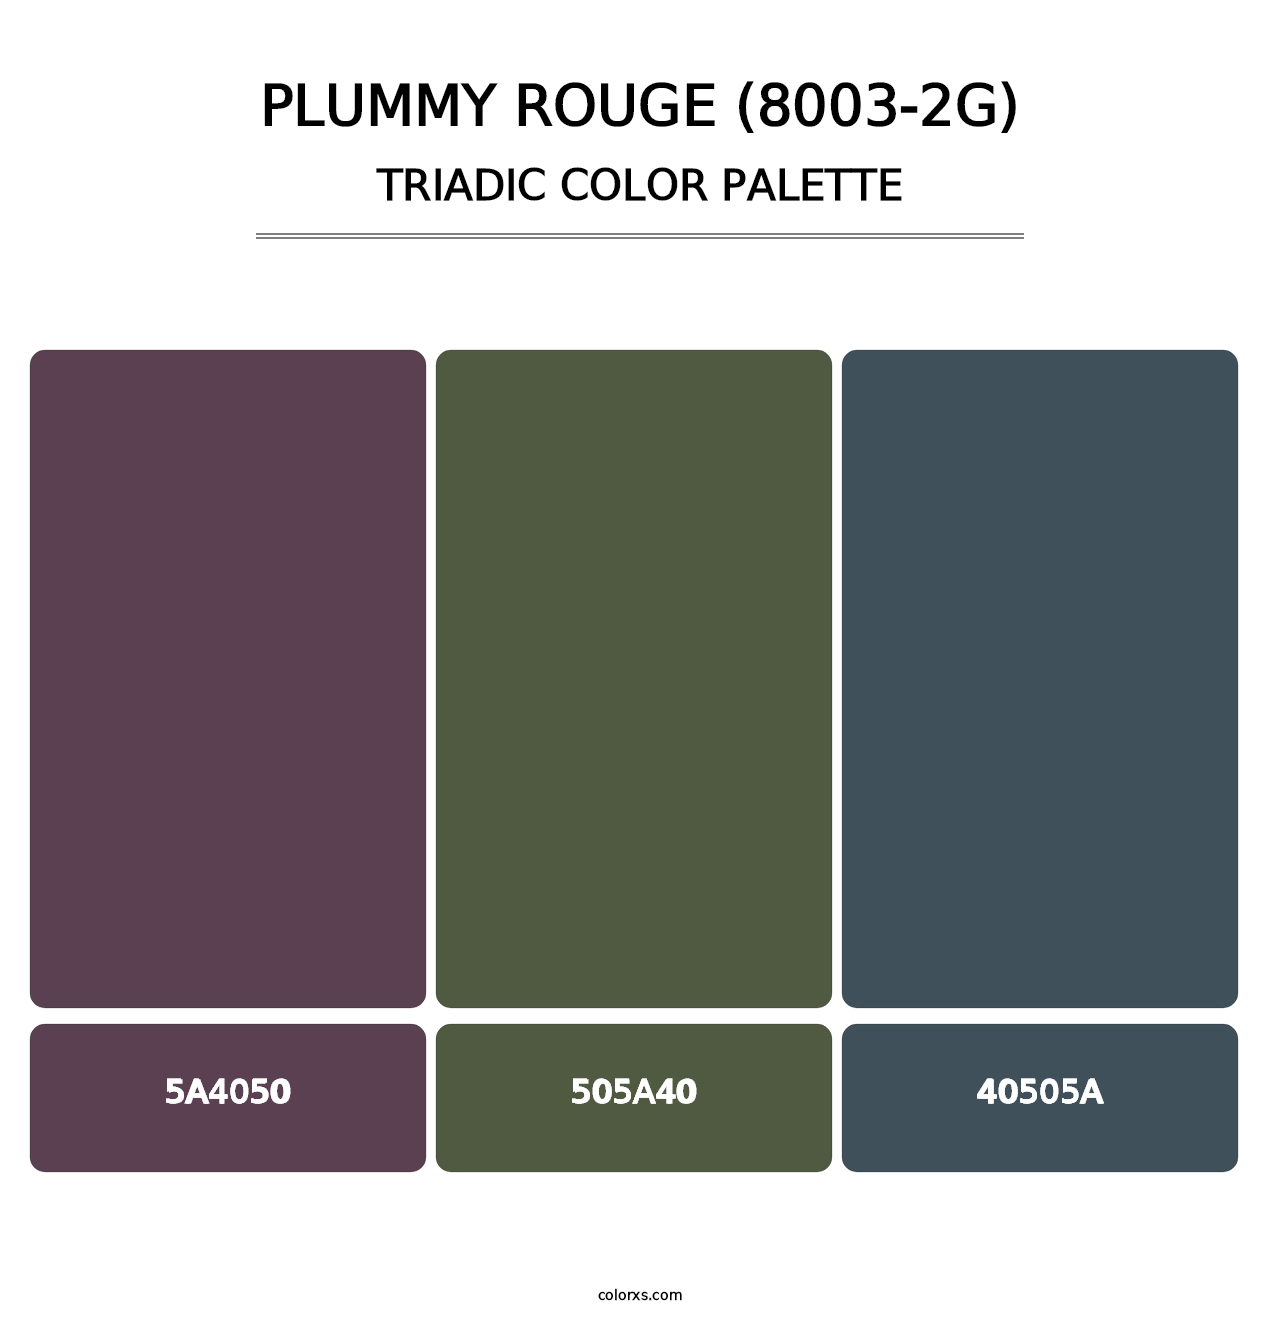 Plummy Rouge (8003-2G) - Triadic Color Palette